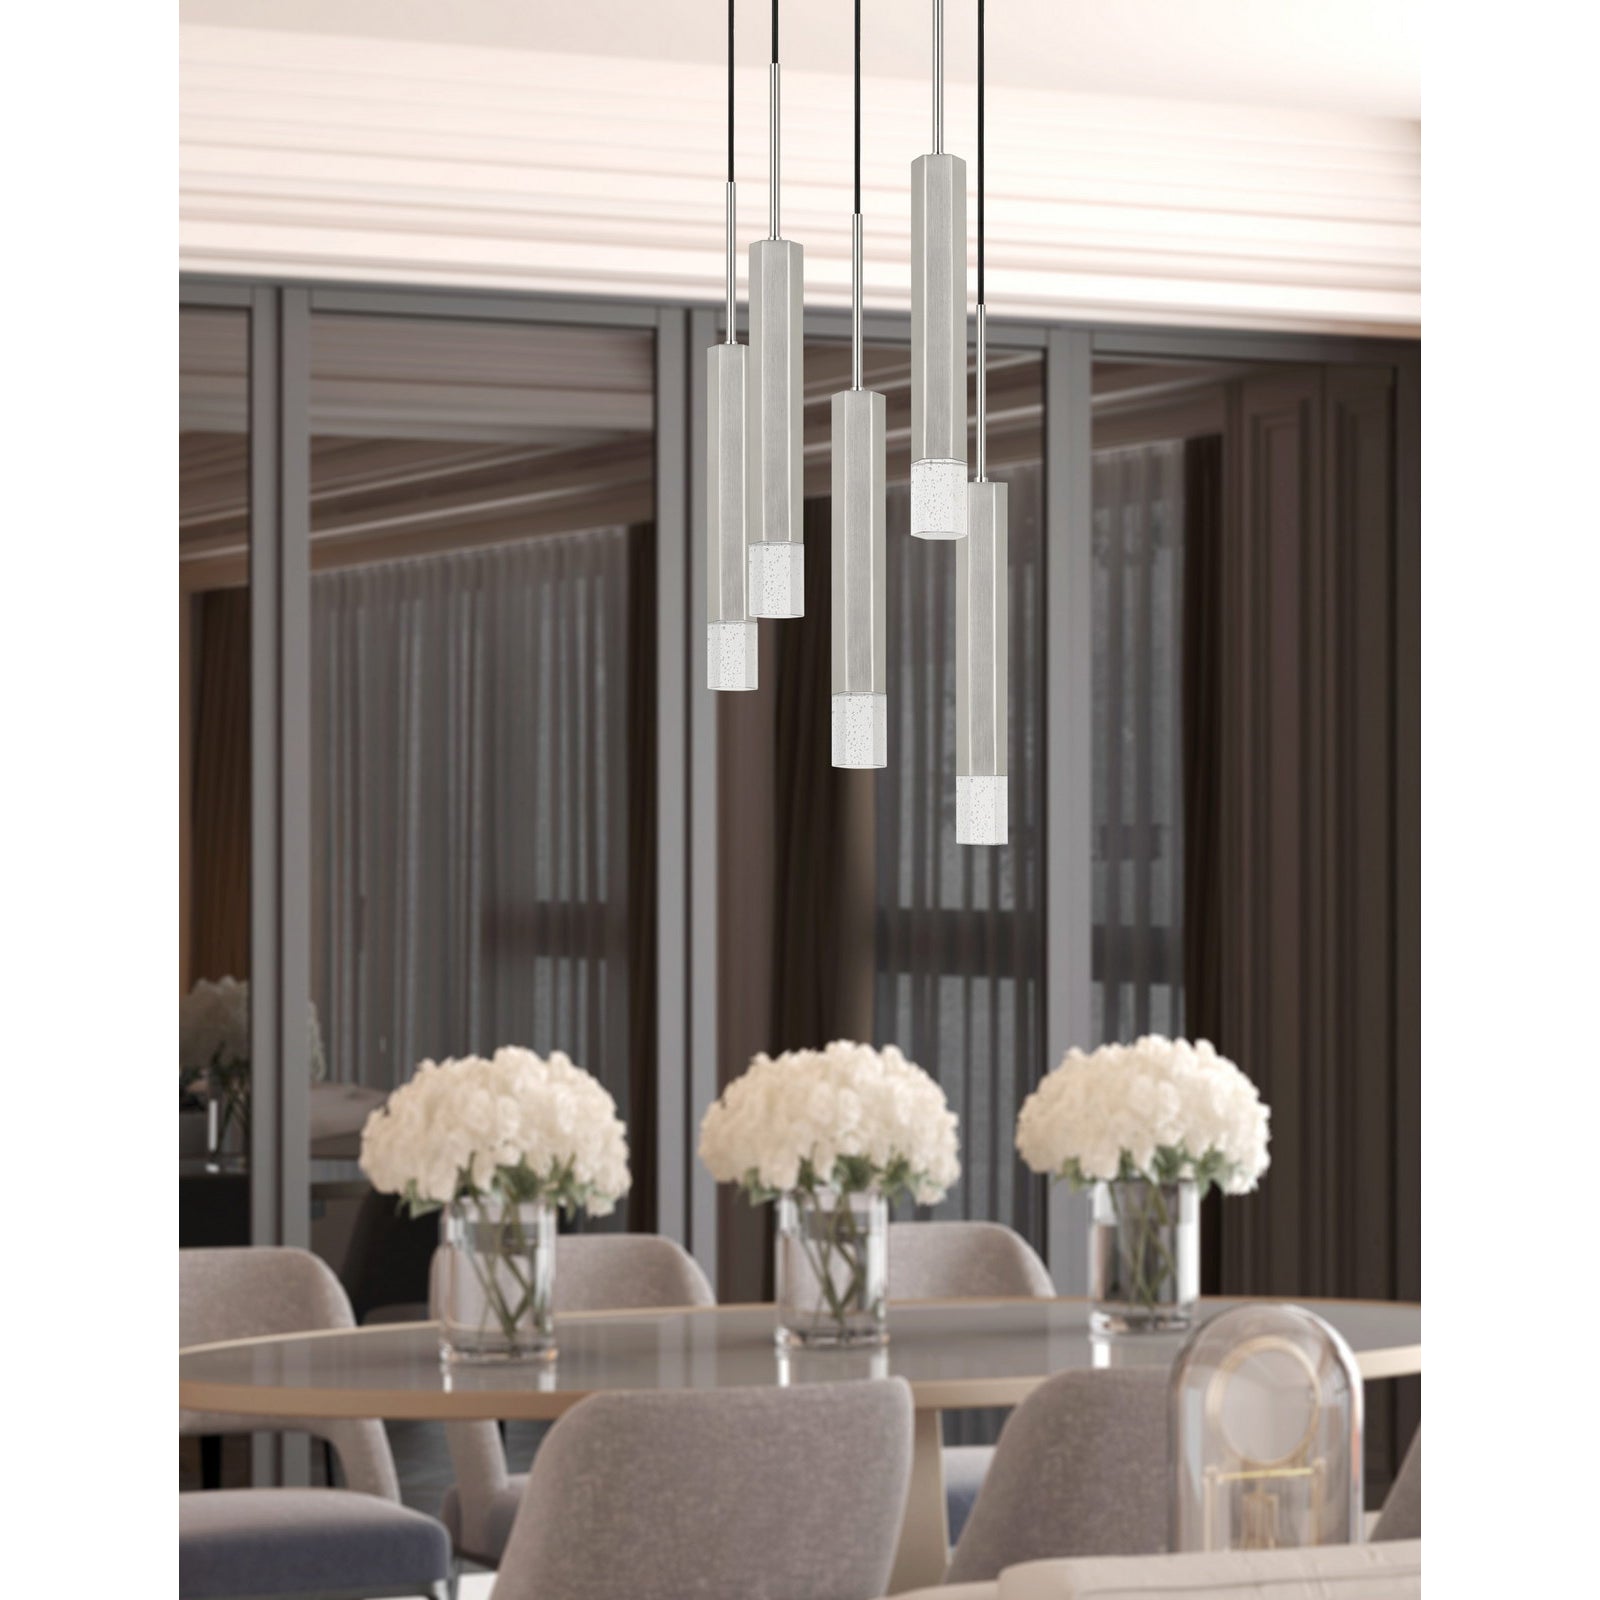 Cal Lighting Troy Integrated Led Dimmable Hexagon Aluminum Casted 5 Lights Pendant With Glass Diffuser